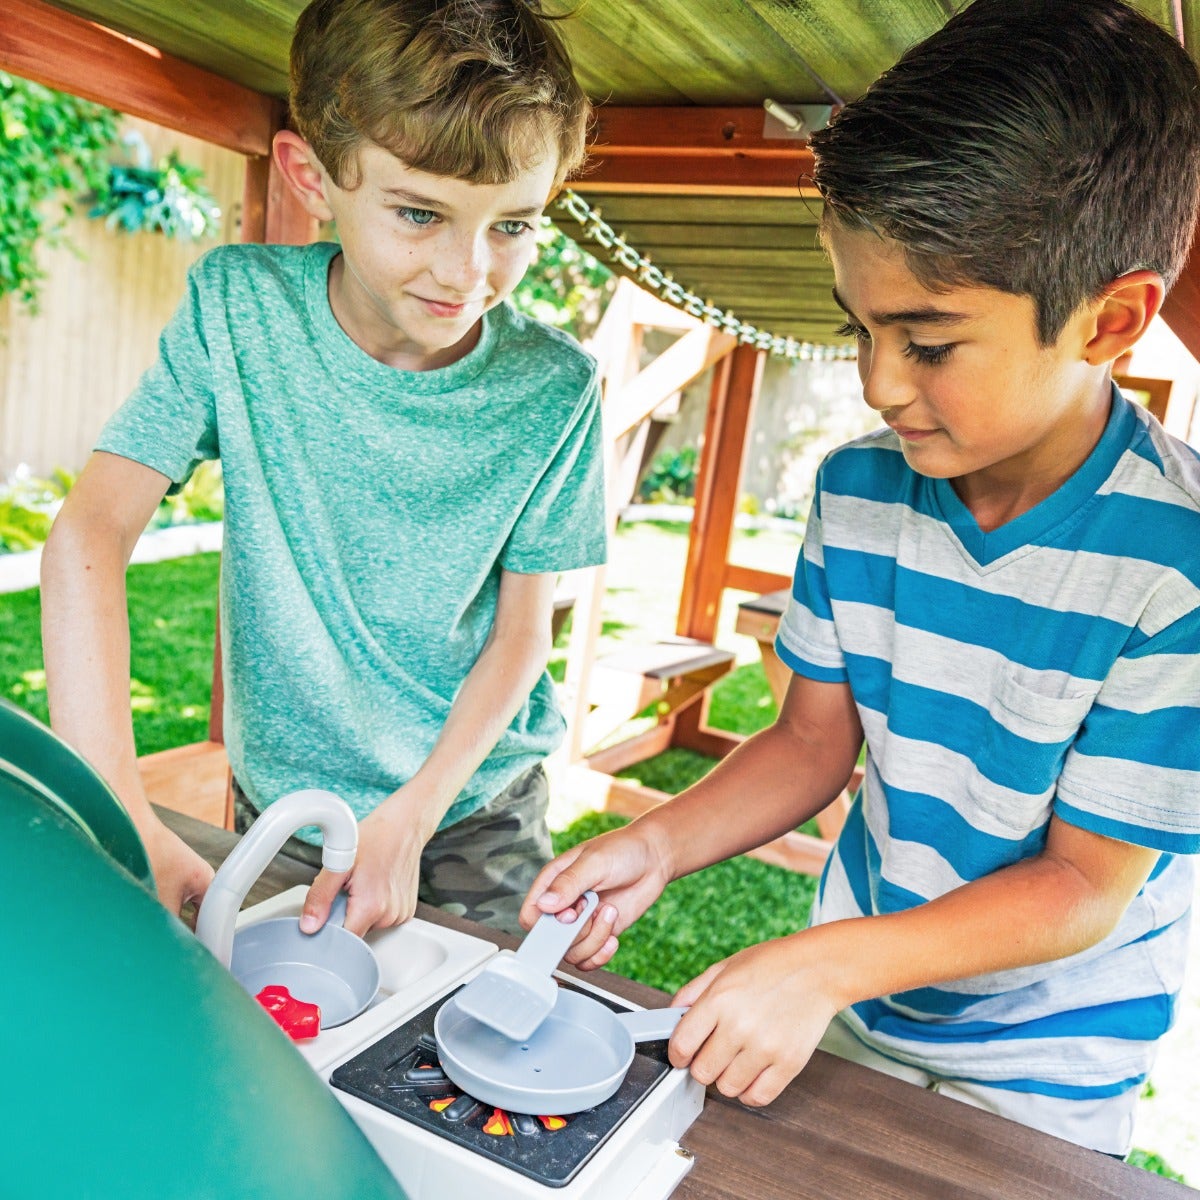 Kitchen is Included: Cooking outdoors is cool. Kids will enjoy getting to act out grilling al fresco, just like mom and dad.